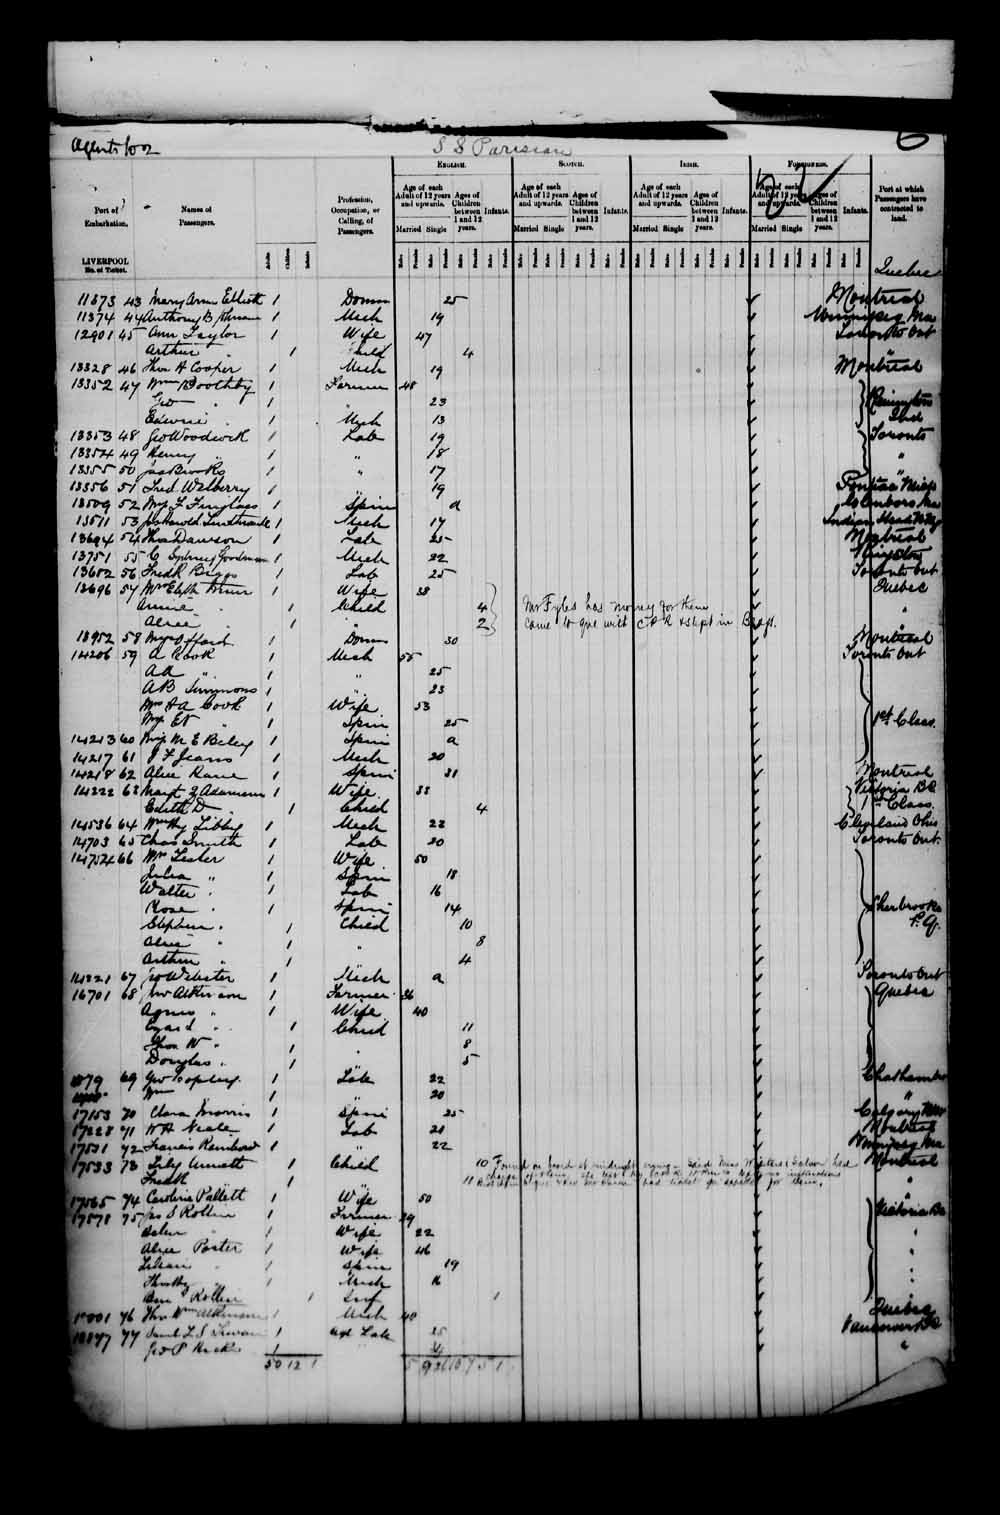 Digitized page of Passenger Lists for Image No.: e003549675